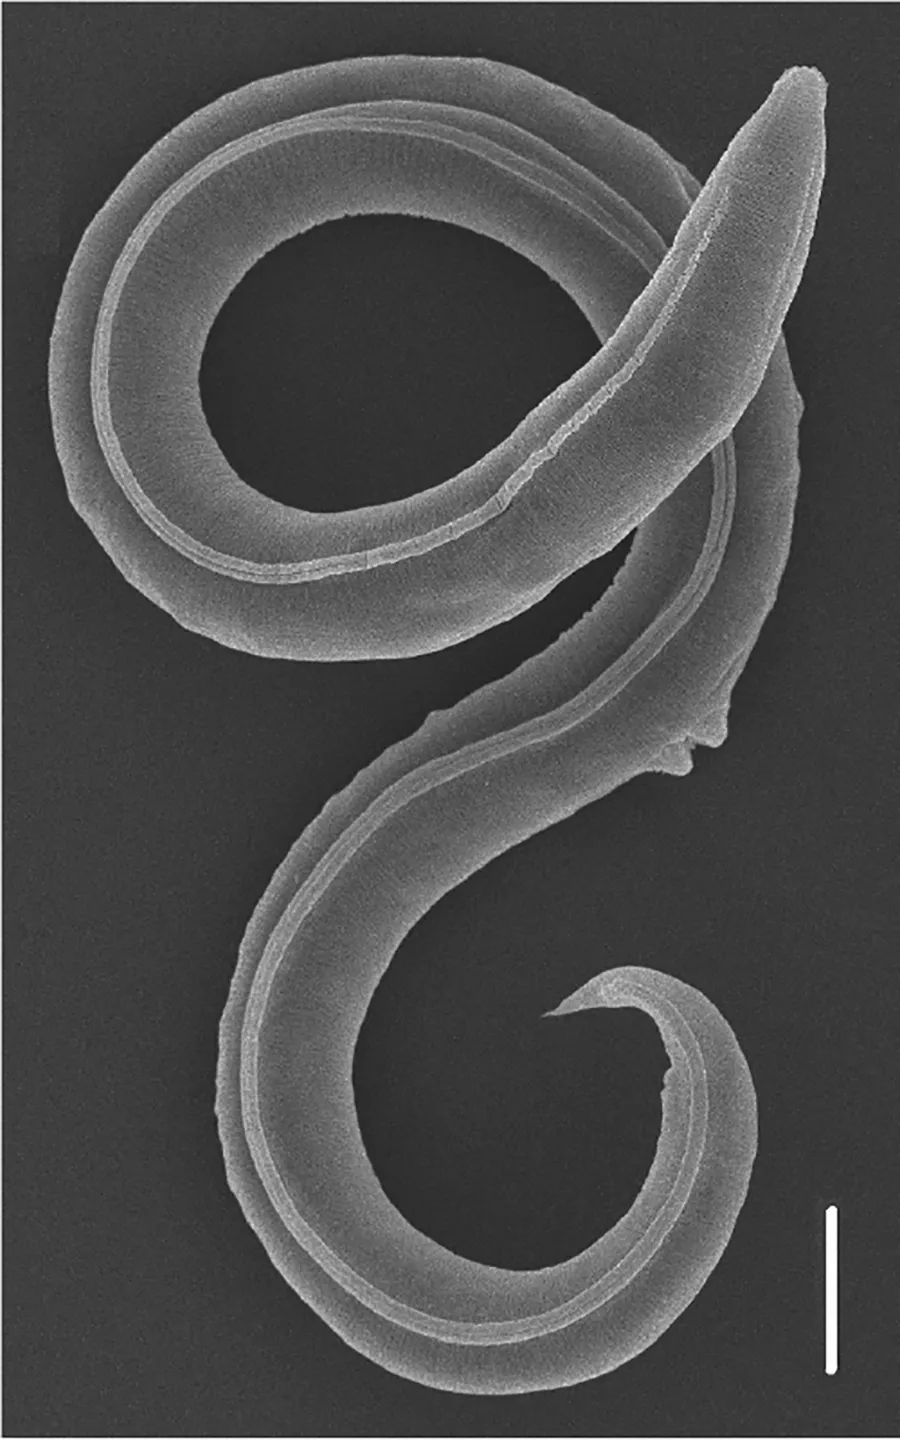 How Russian scientists were able to use water as a medium to revive two worms that had been frozen for 46,000 years and could teach us about climate change